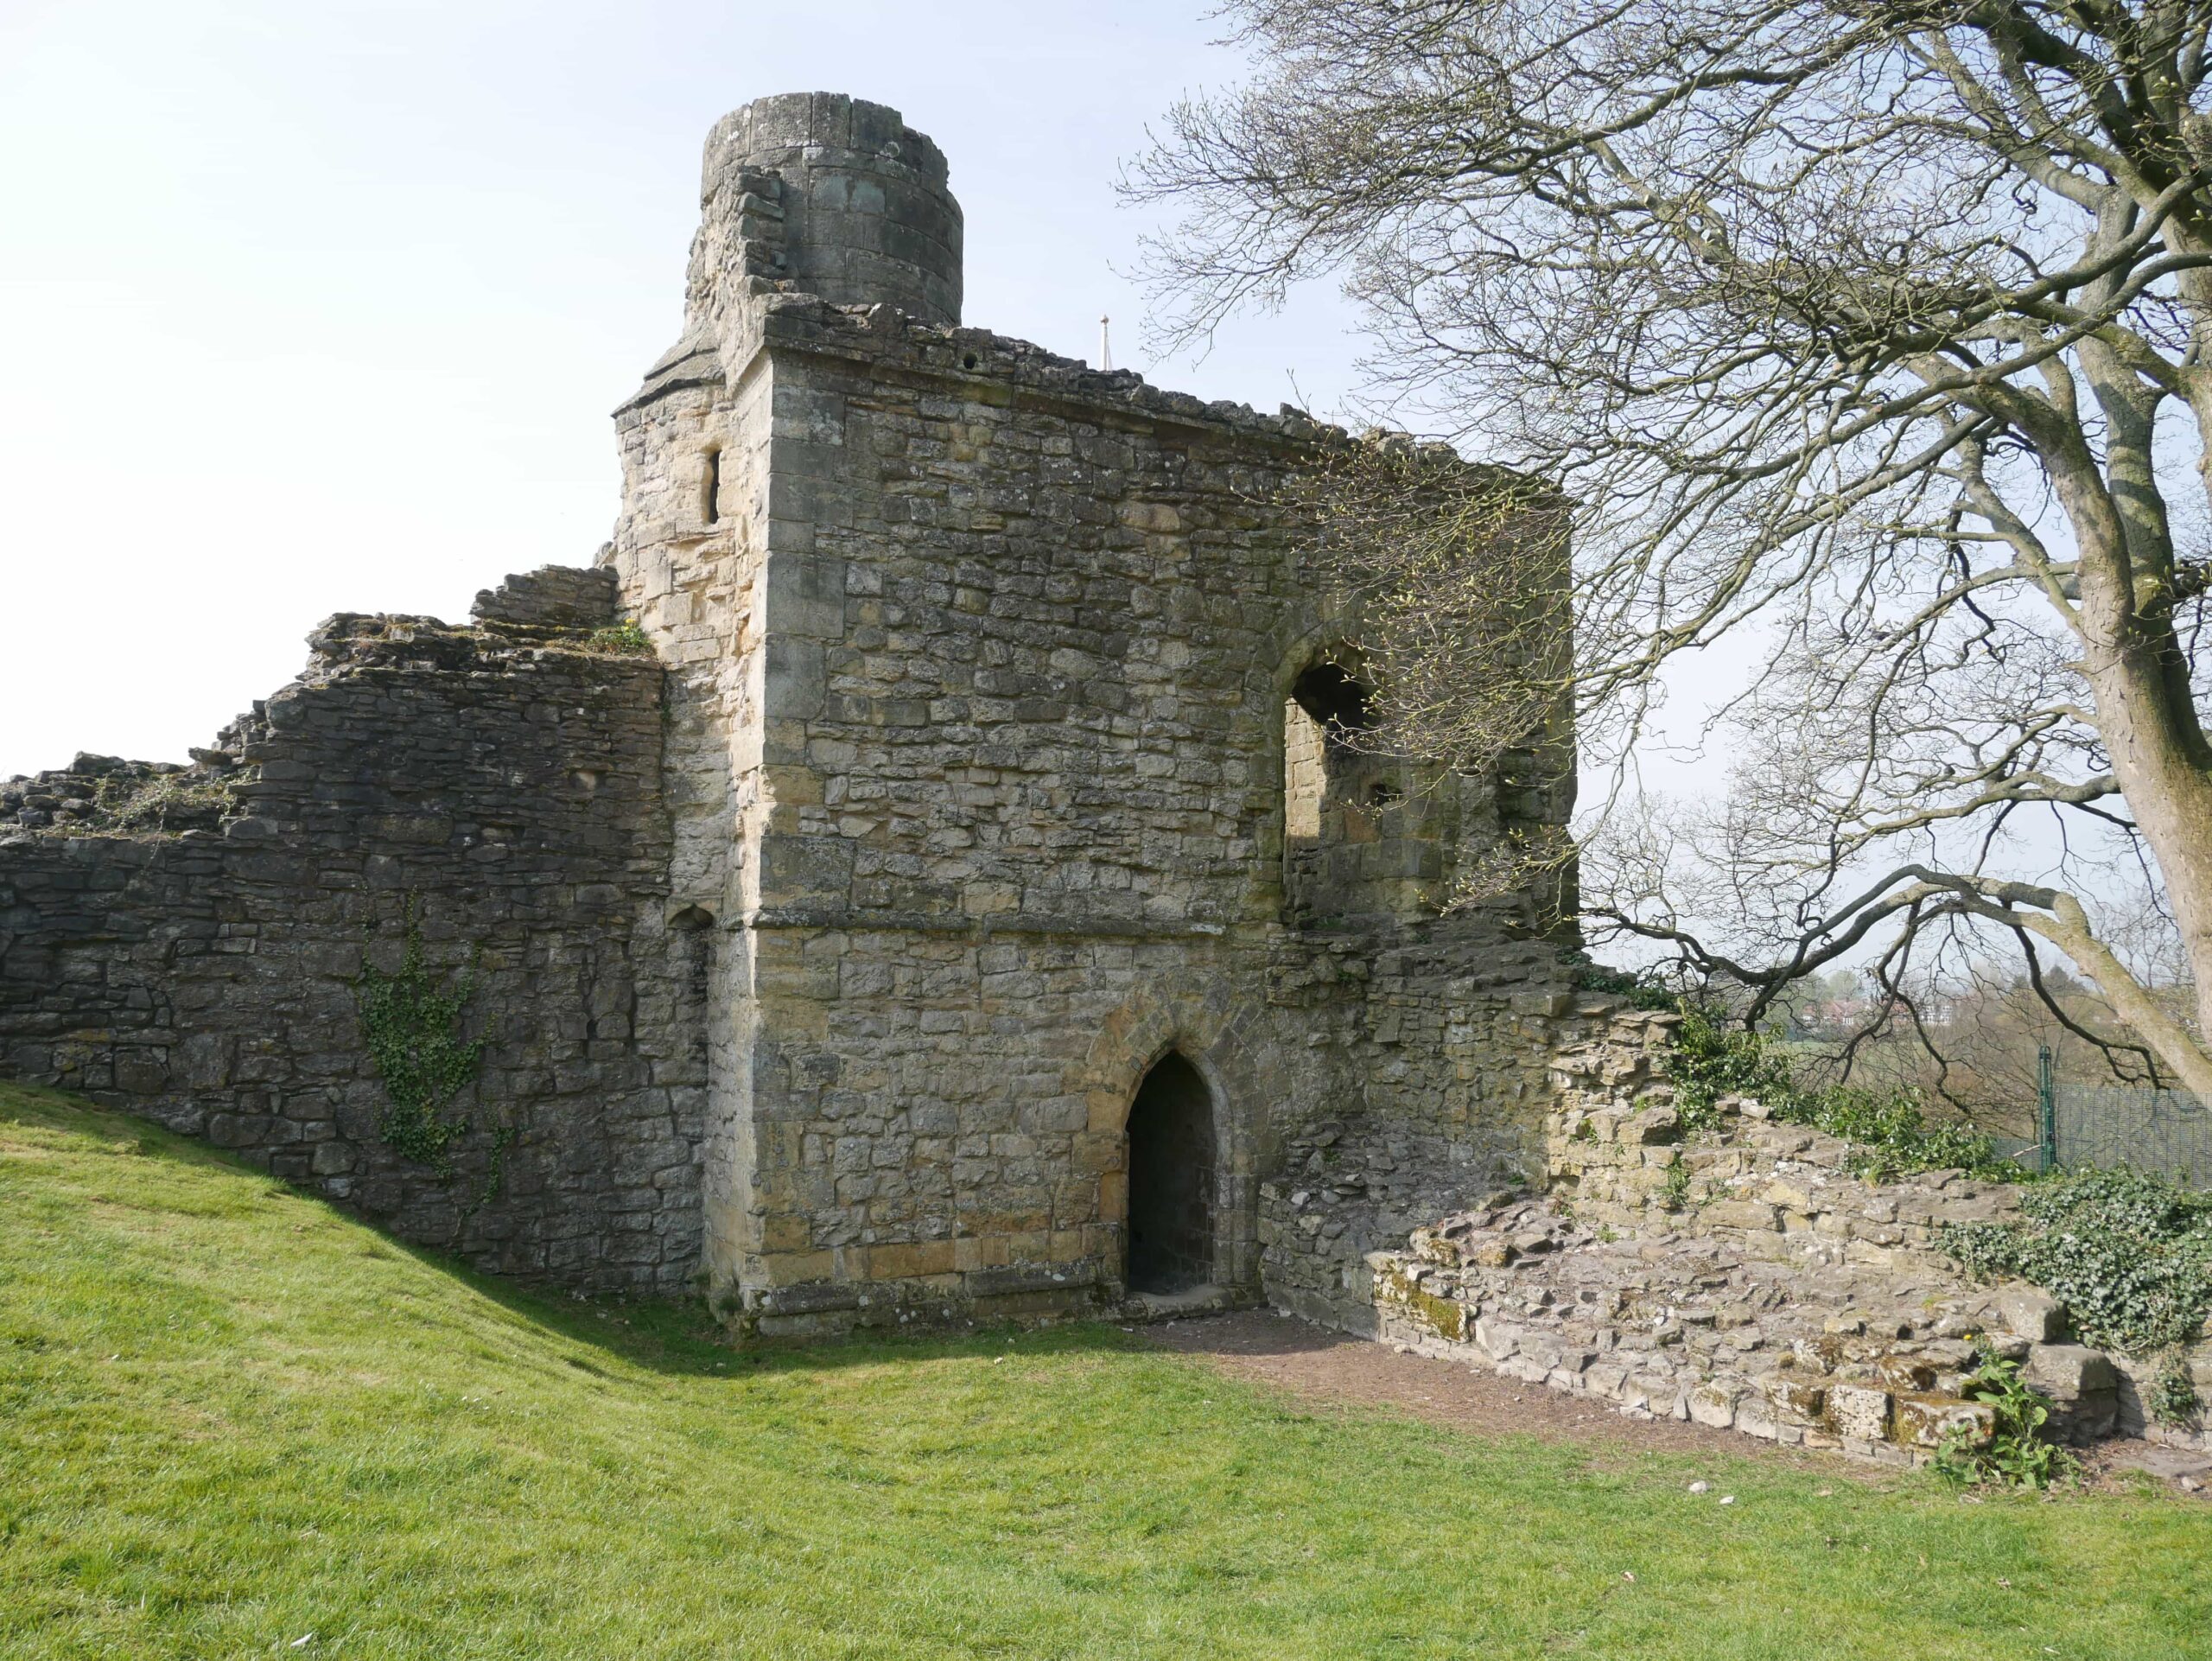 One of the Towers at Pickering castle